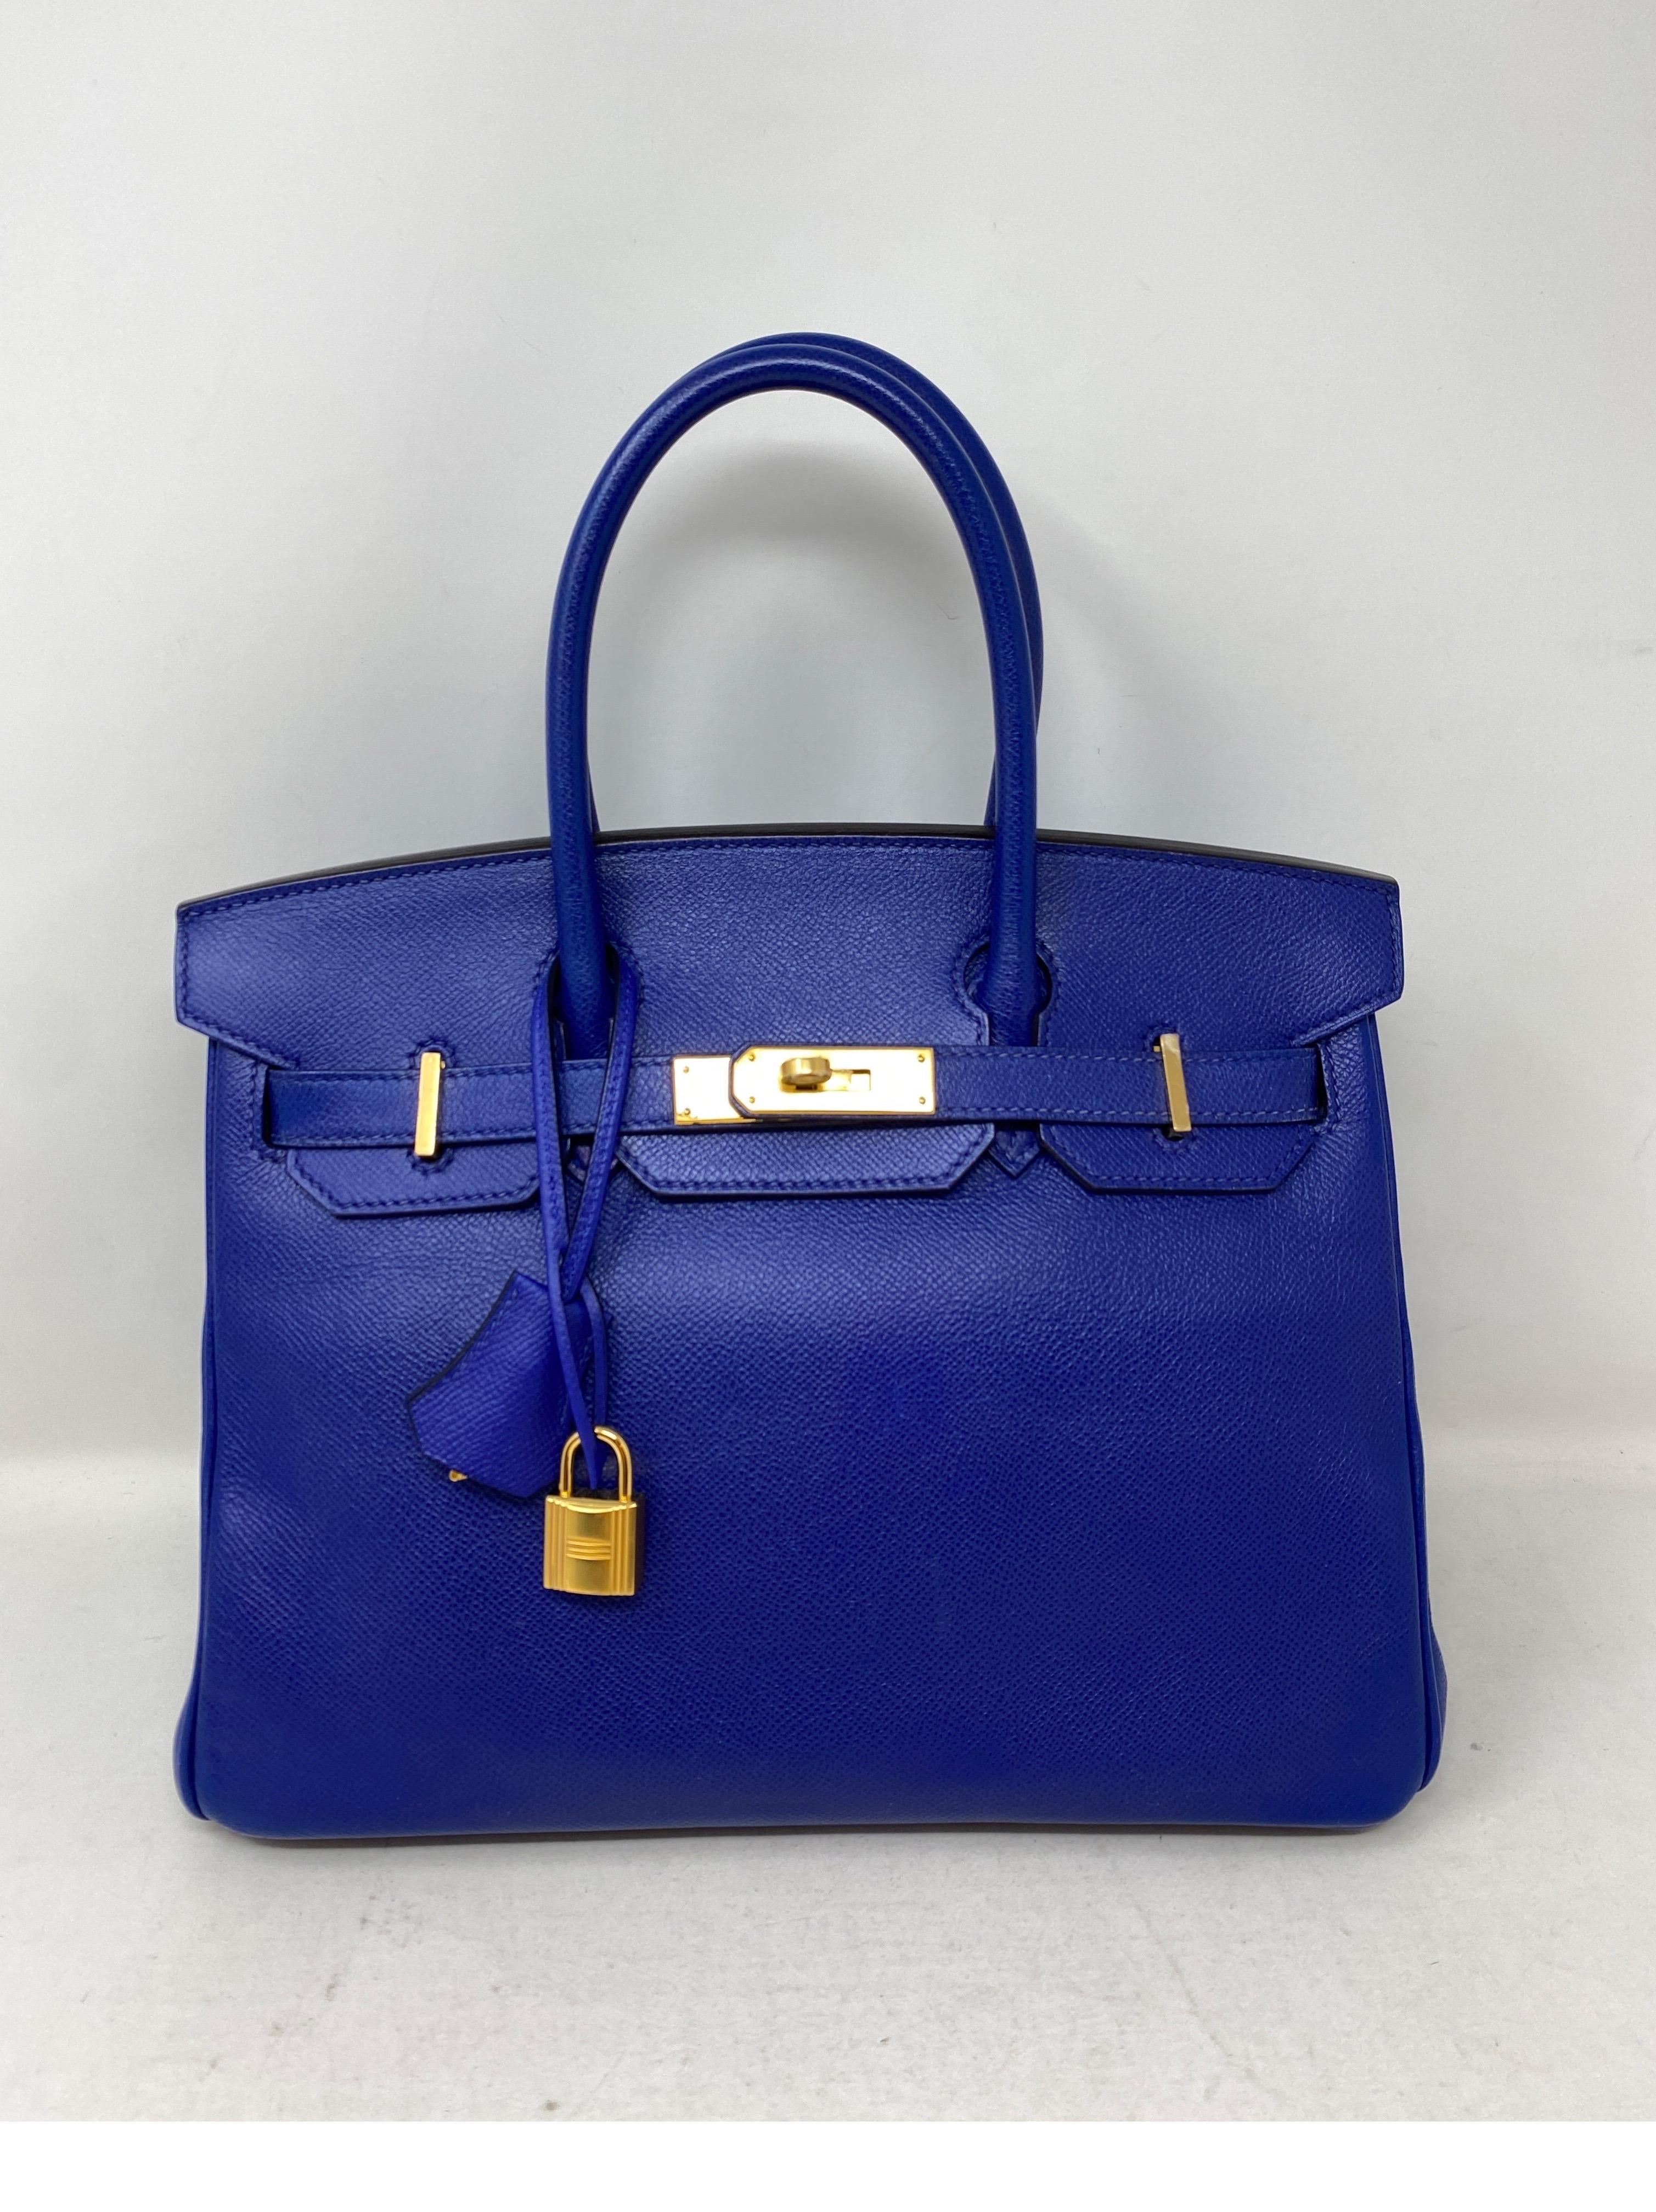 Hermes Bleu Electrique Birkin 30 Bag. Rare blue color. Highly sought after color and most wanted size 30. Excellent condition. Gold hardware. Epsom leather. Great investment bag. A unique color to add to your Birkin collection. Includes clochette,